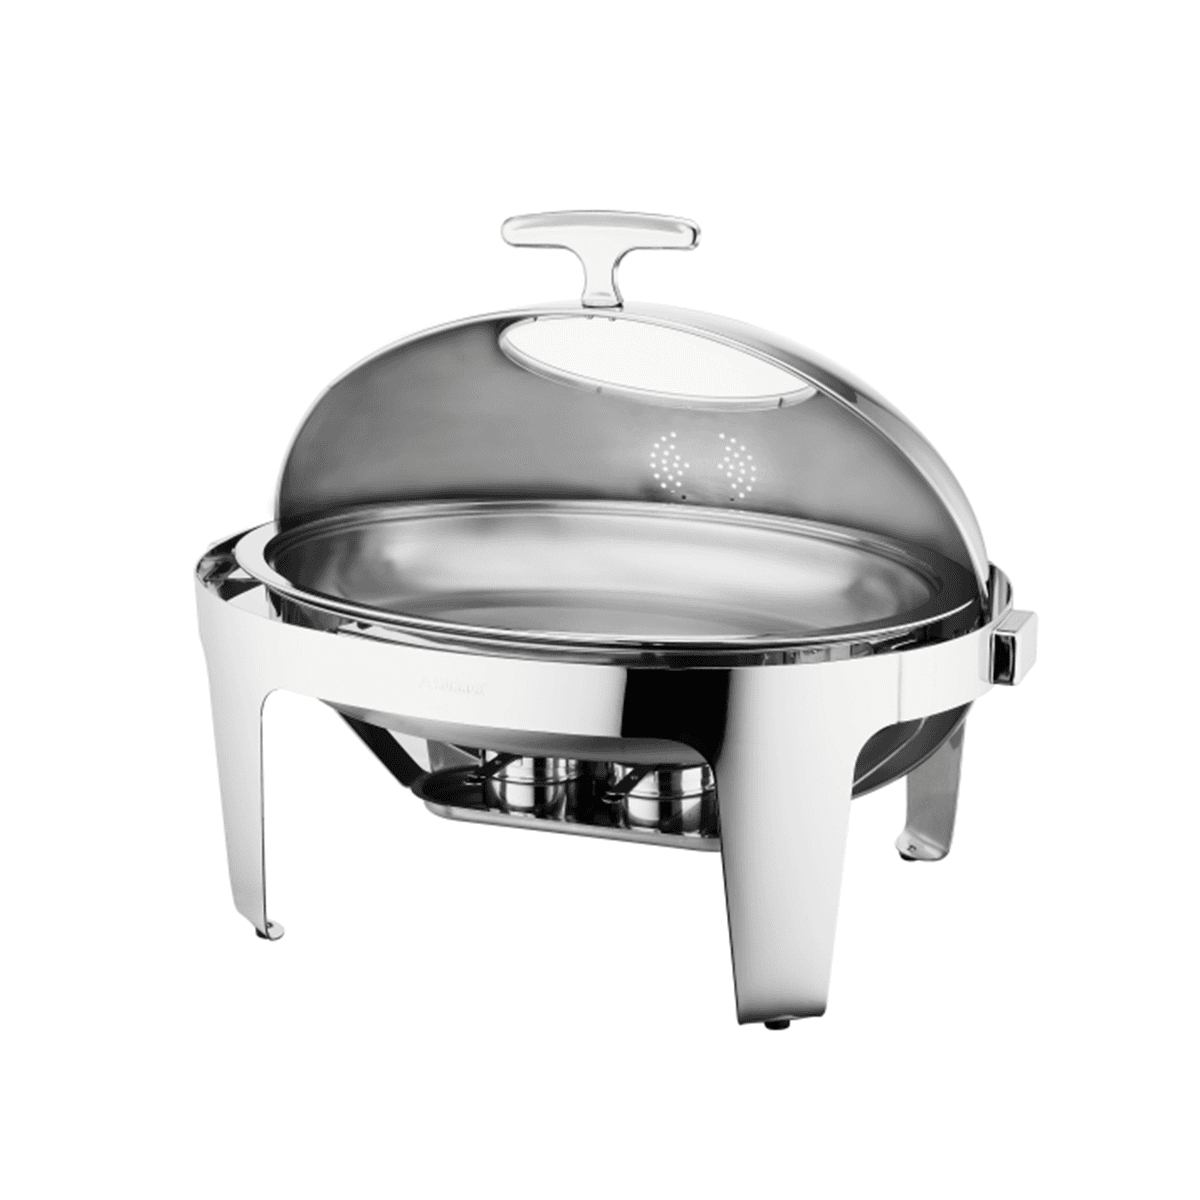 Sunnex Elite Stainless Steel Roll-Top Chafer Oval 9 Liter Silver Stainless Steel